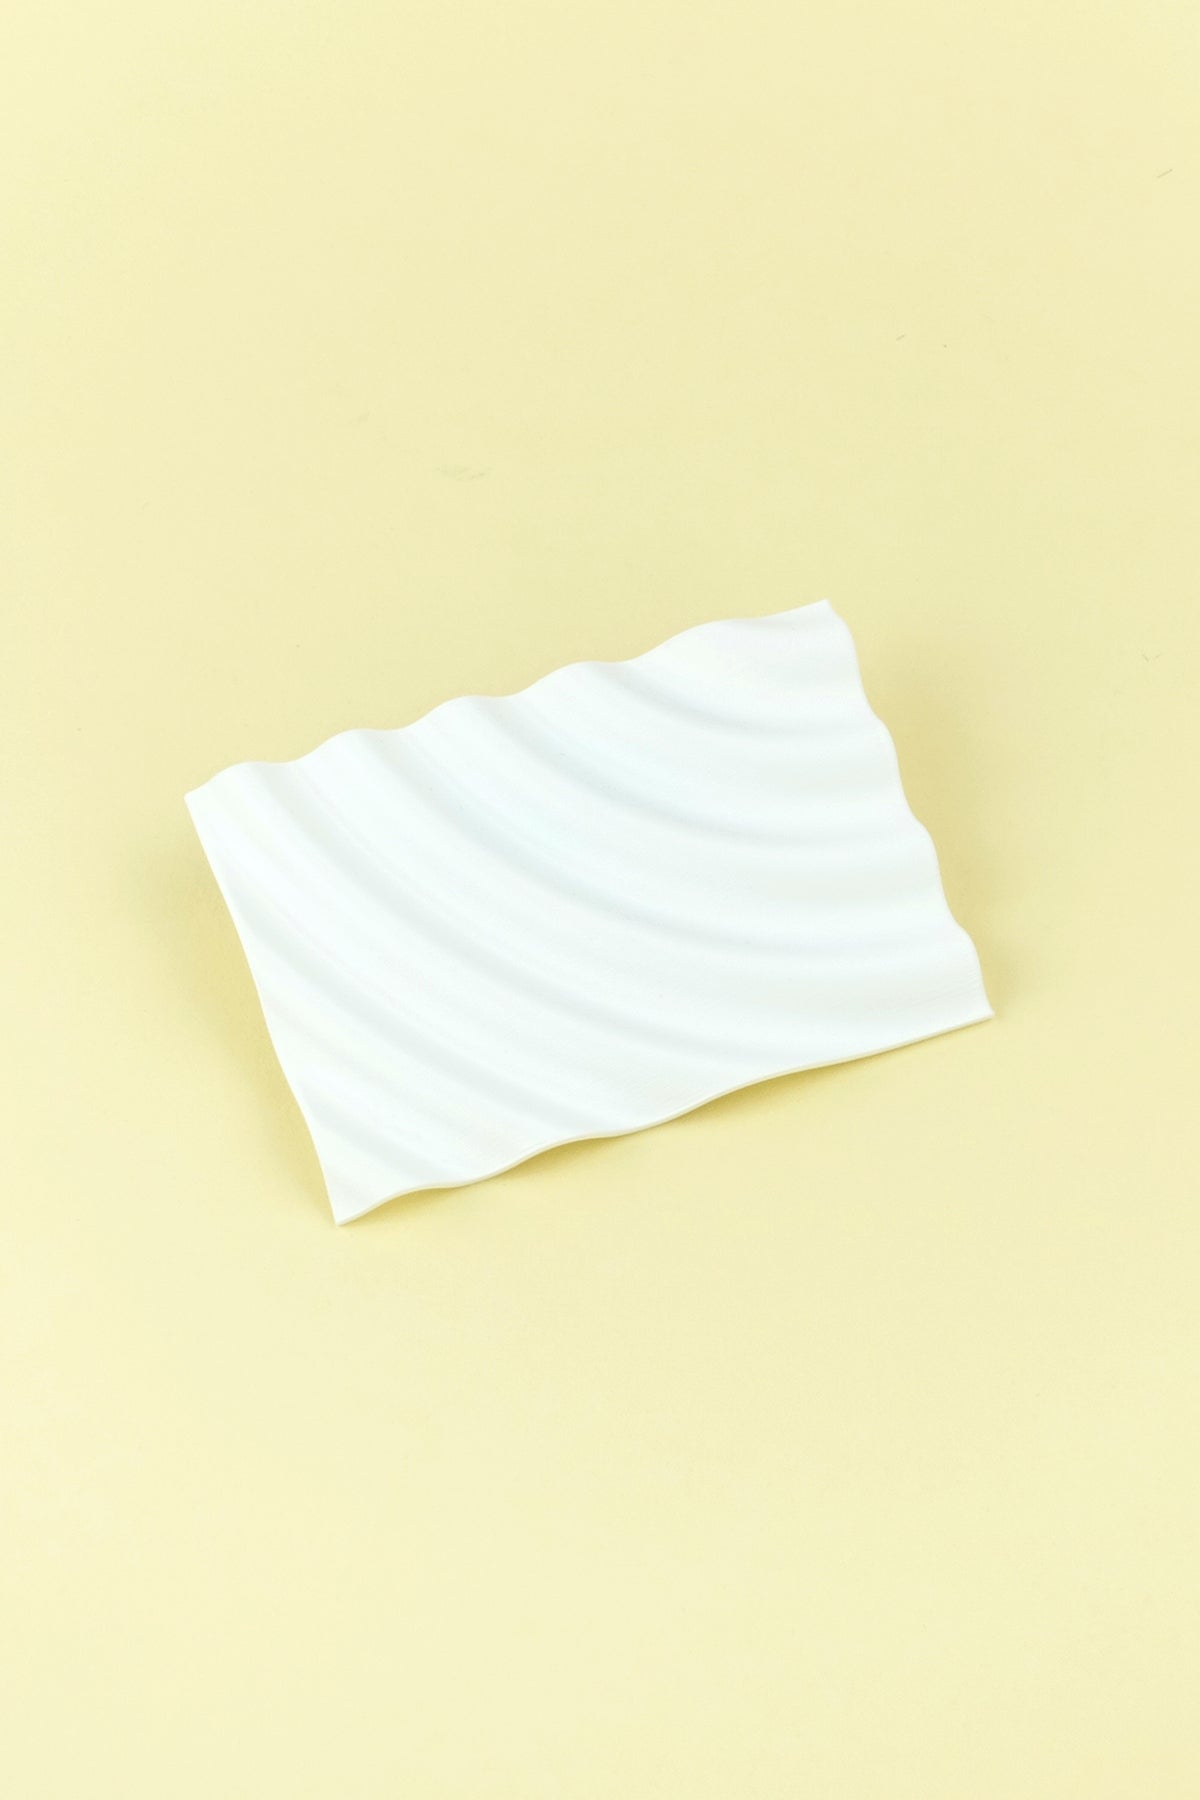 Seifenschale aus recyceltem PET / recycled PET soap dish pearl white ripple